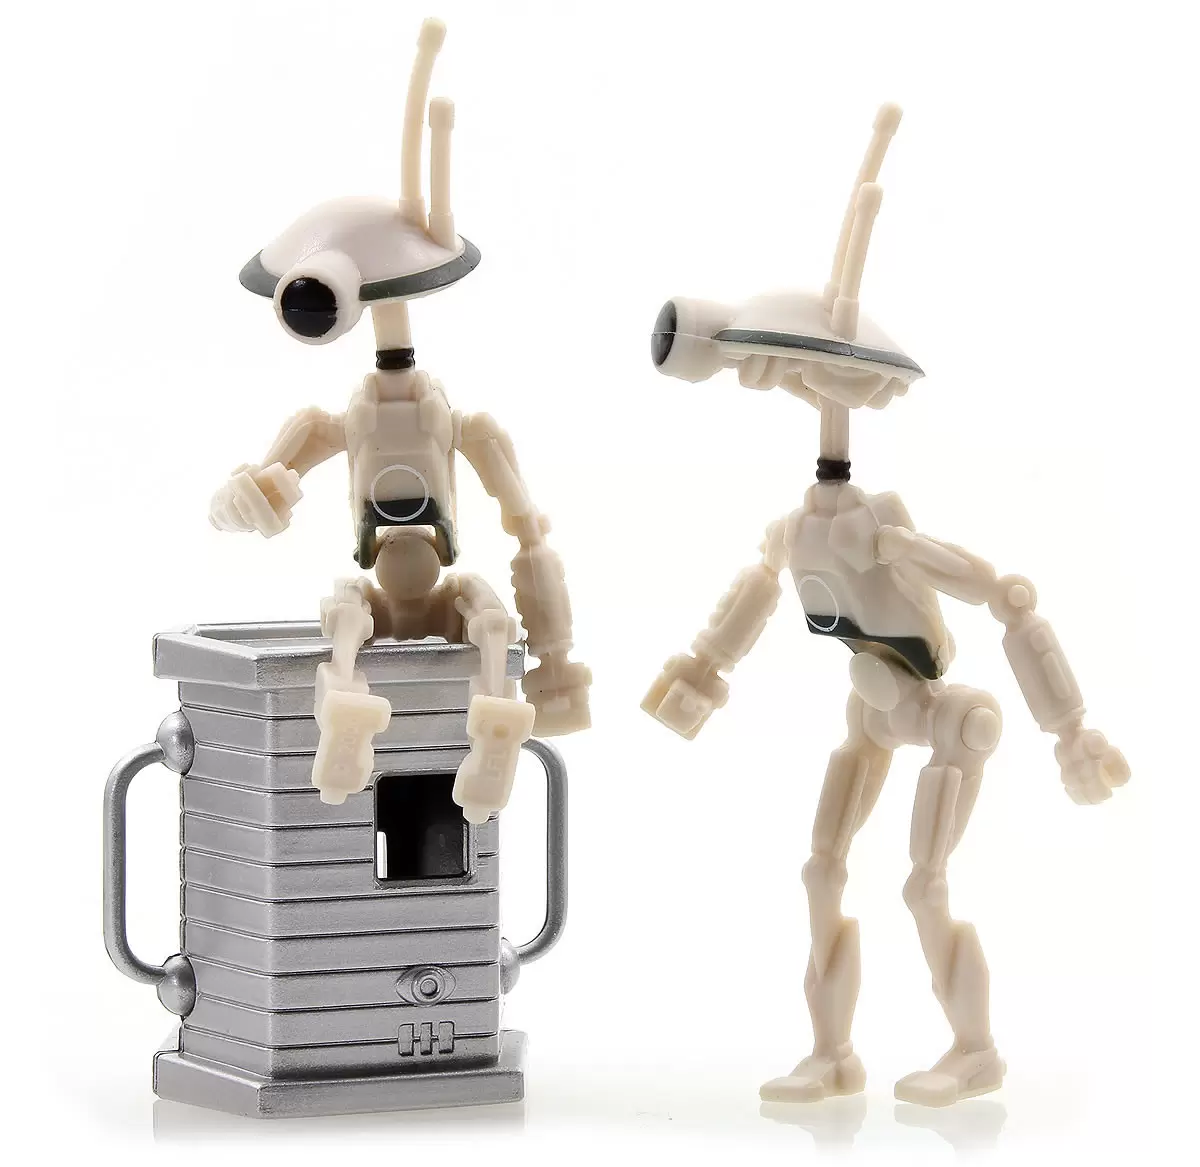 30th Anniversary Collection (TAC) - Pit Droids 2-pack with accessory 1 (white)